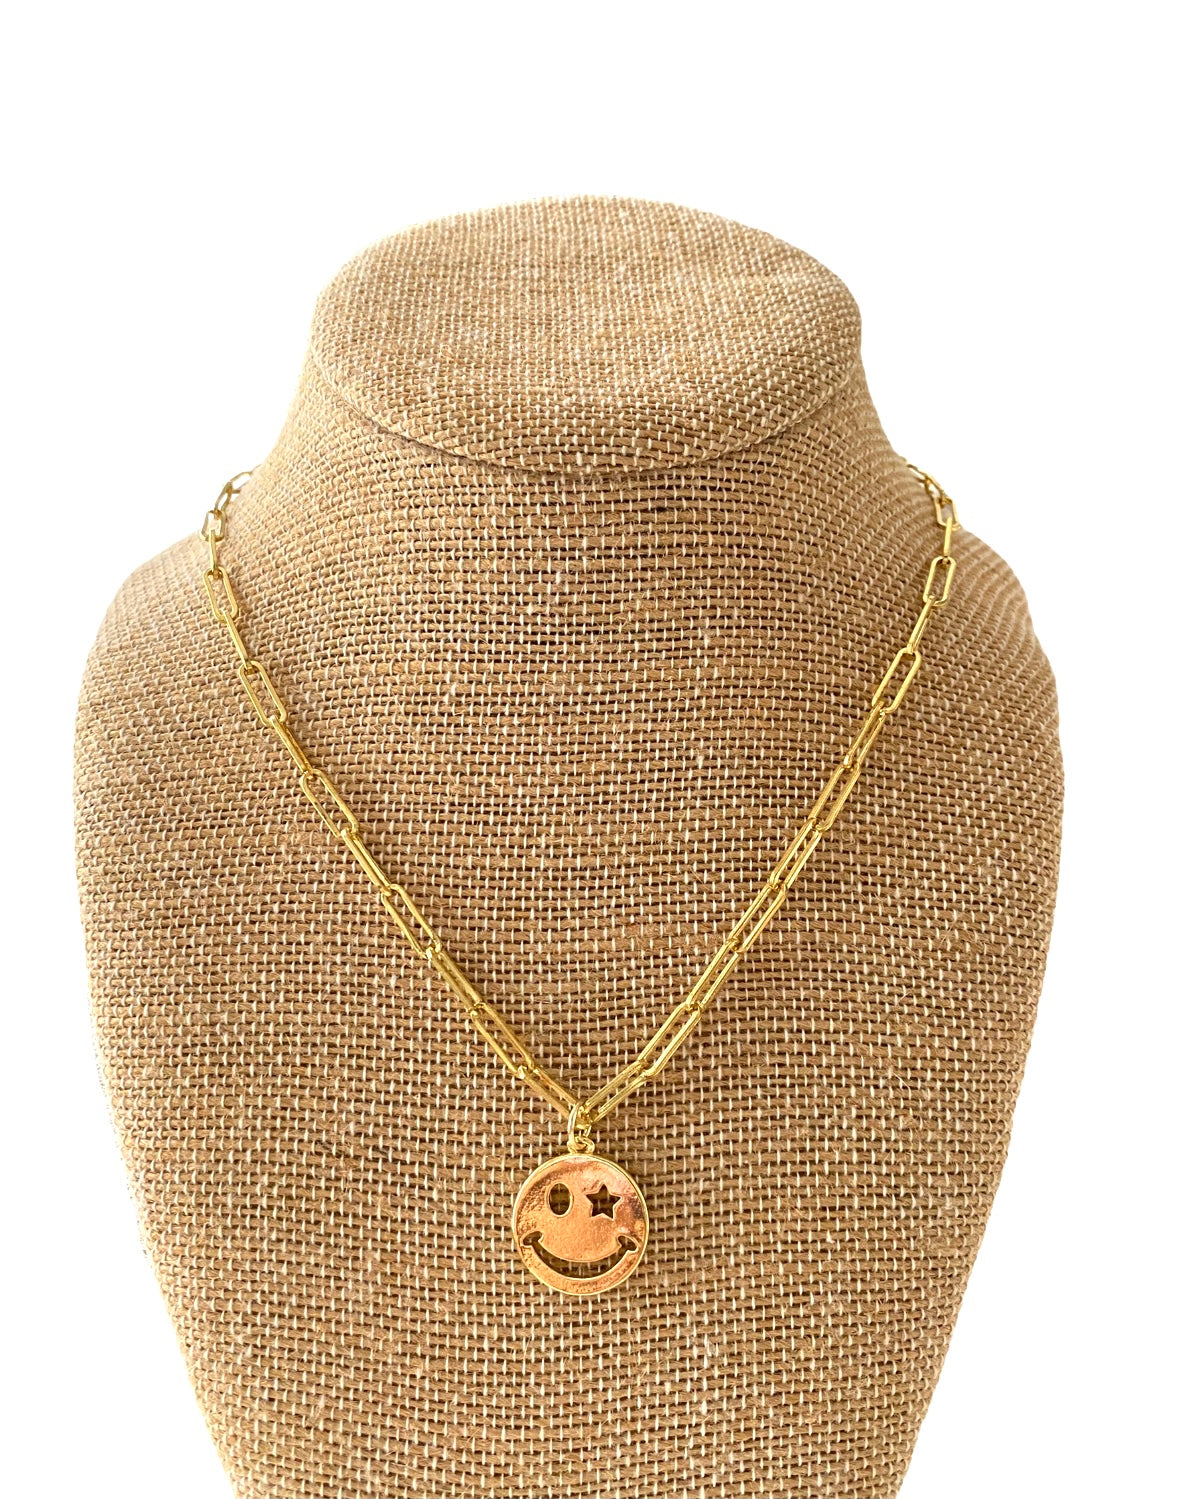 Smiley on chain